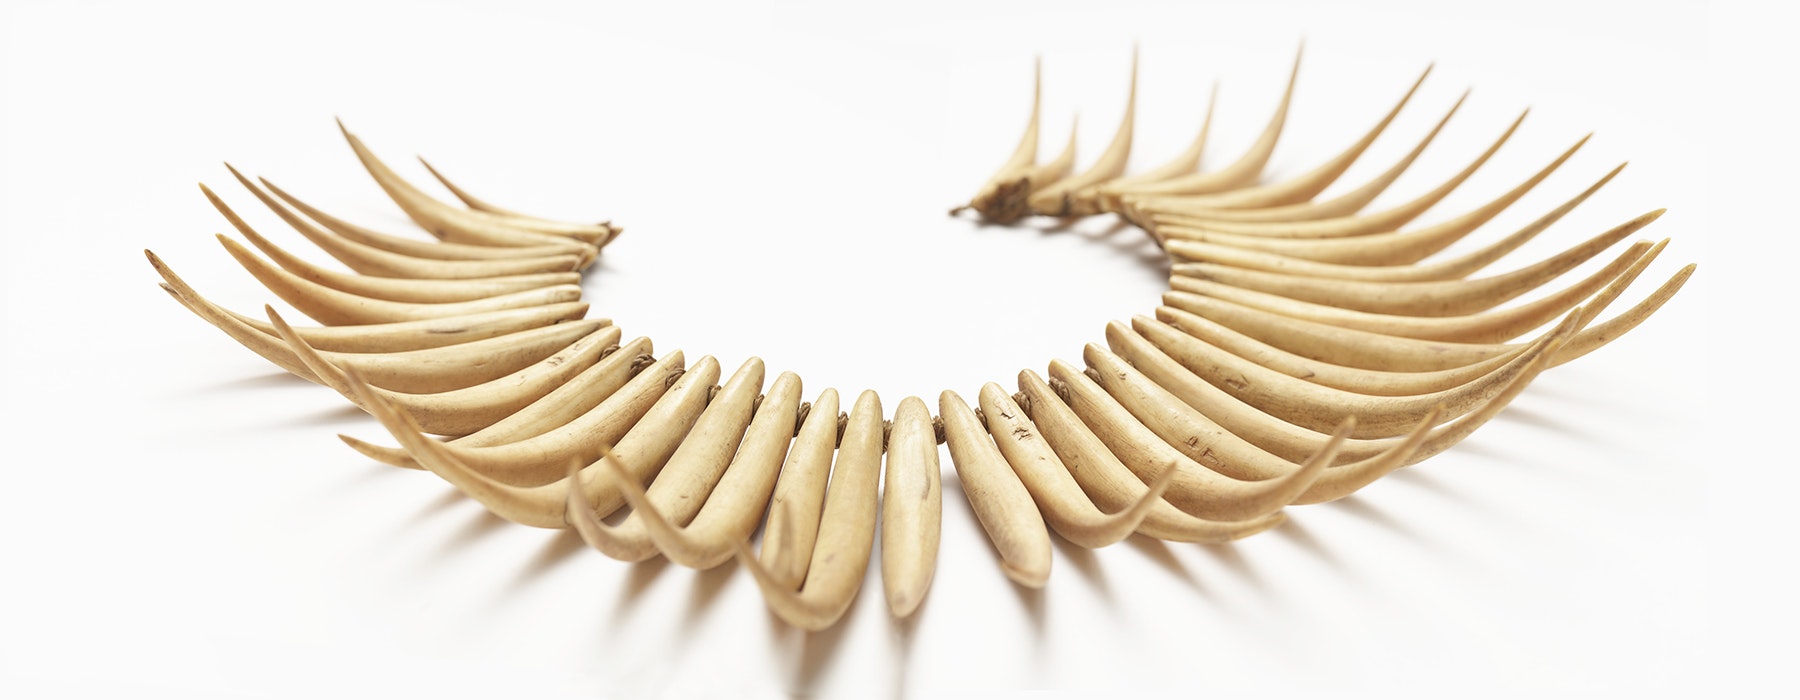 A necklace made of long curved bone sitting on a white surface